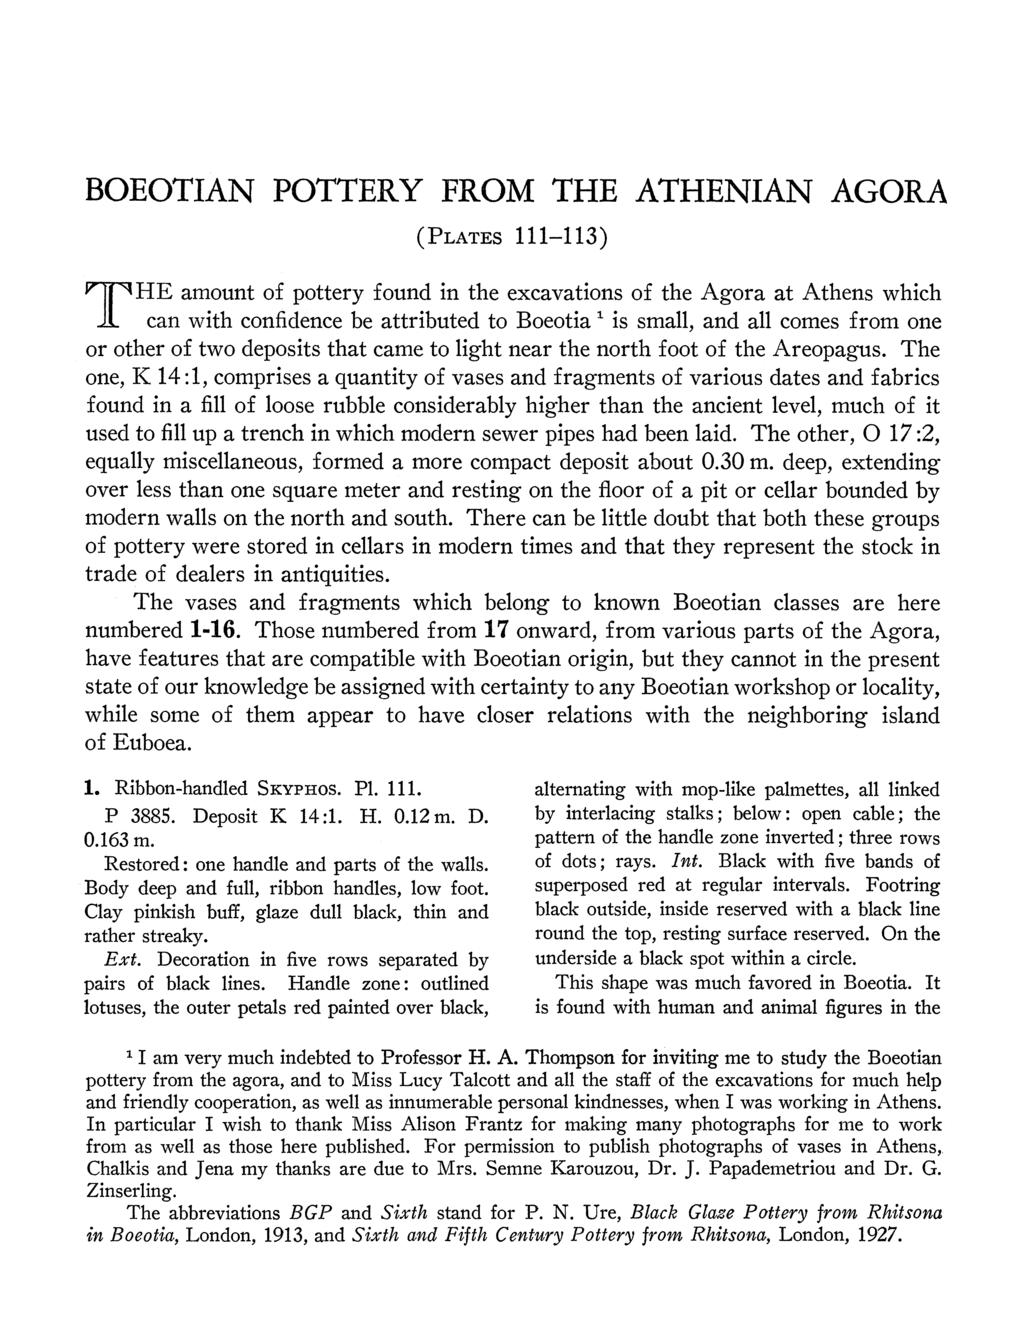 BOEOTIAN POTTERY FROM THE ATHENIAN AGORA (PLATES 111-113)?